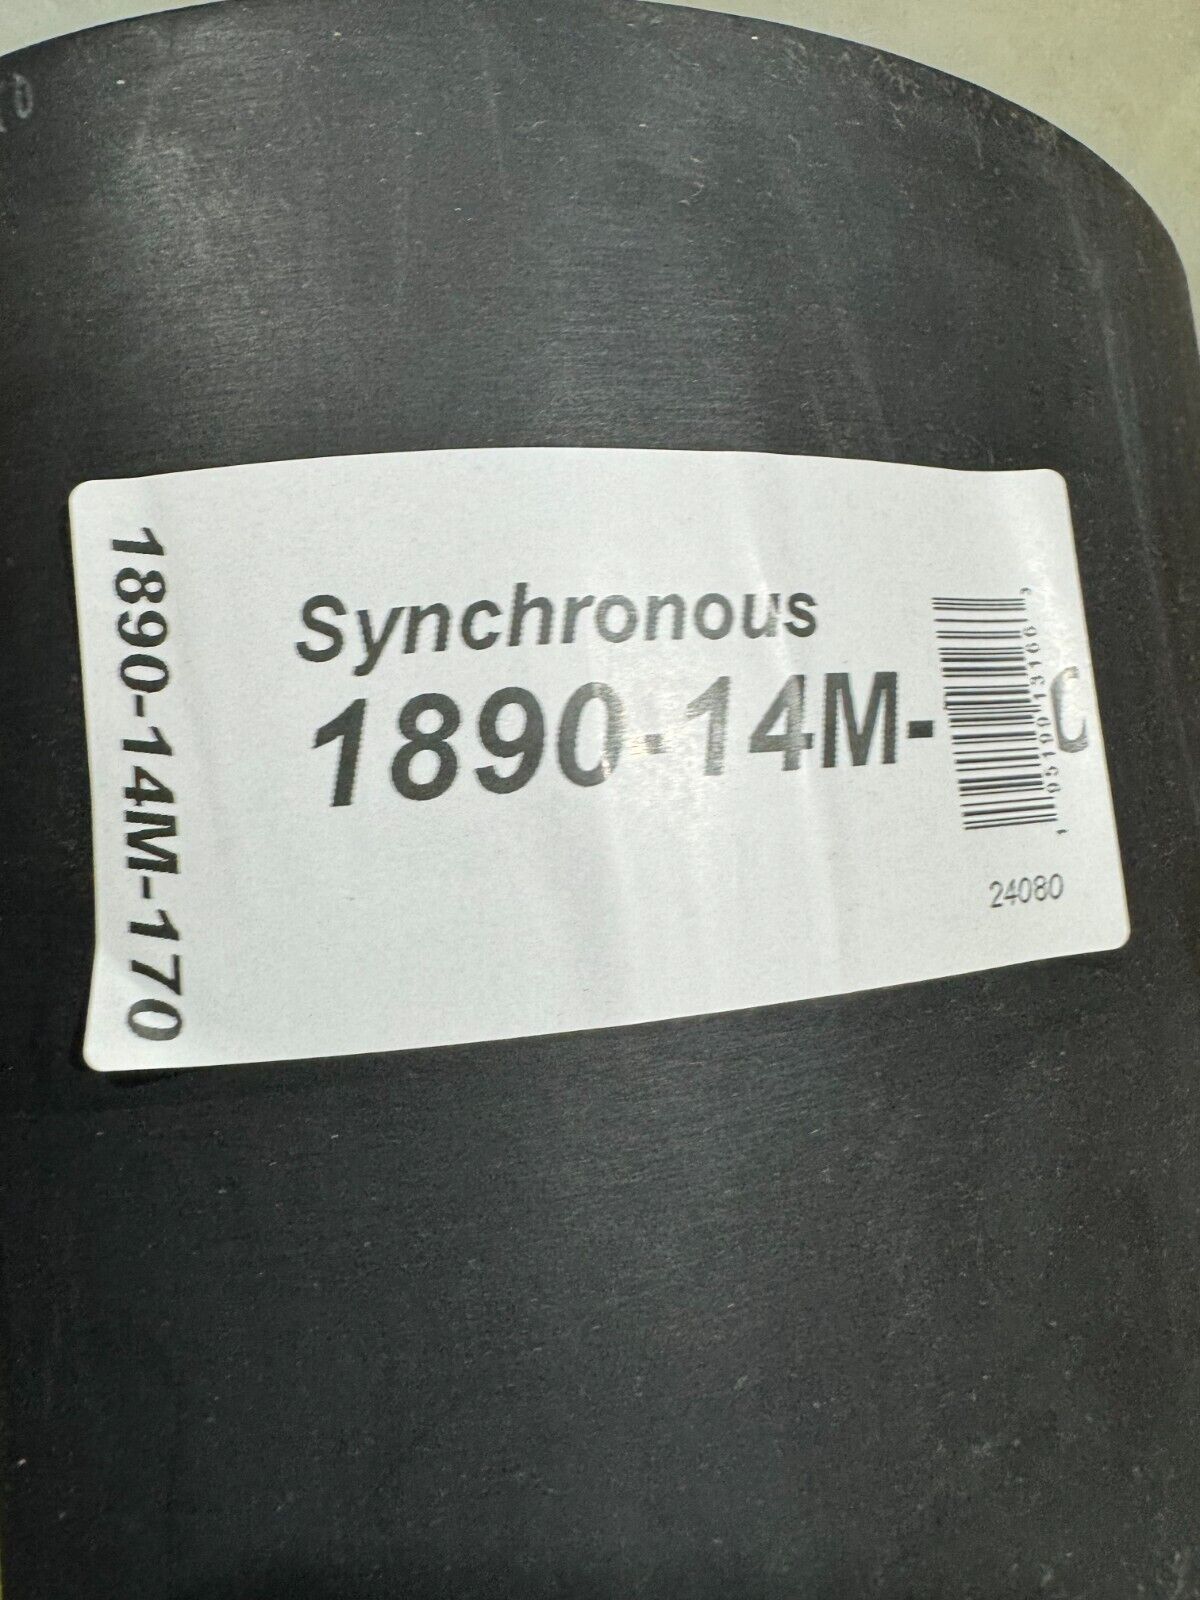 FACTORY NEW GOODYEAR SYNCHRONOUS Sync HTD TIMING BELT 1890-14M-170